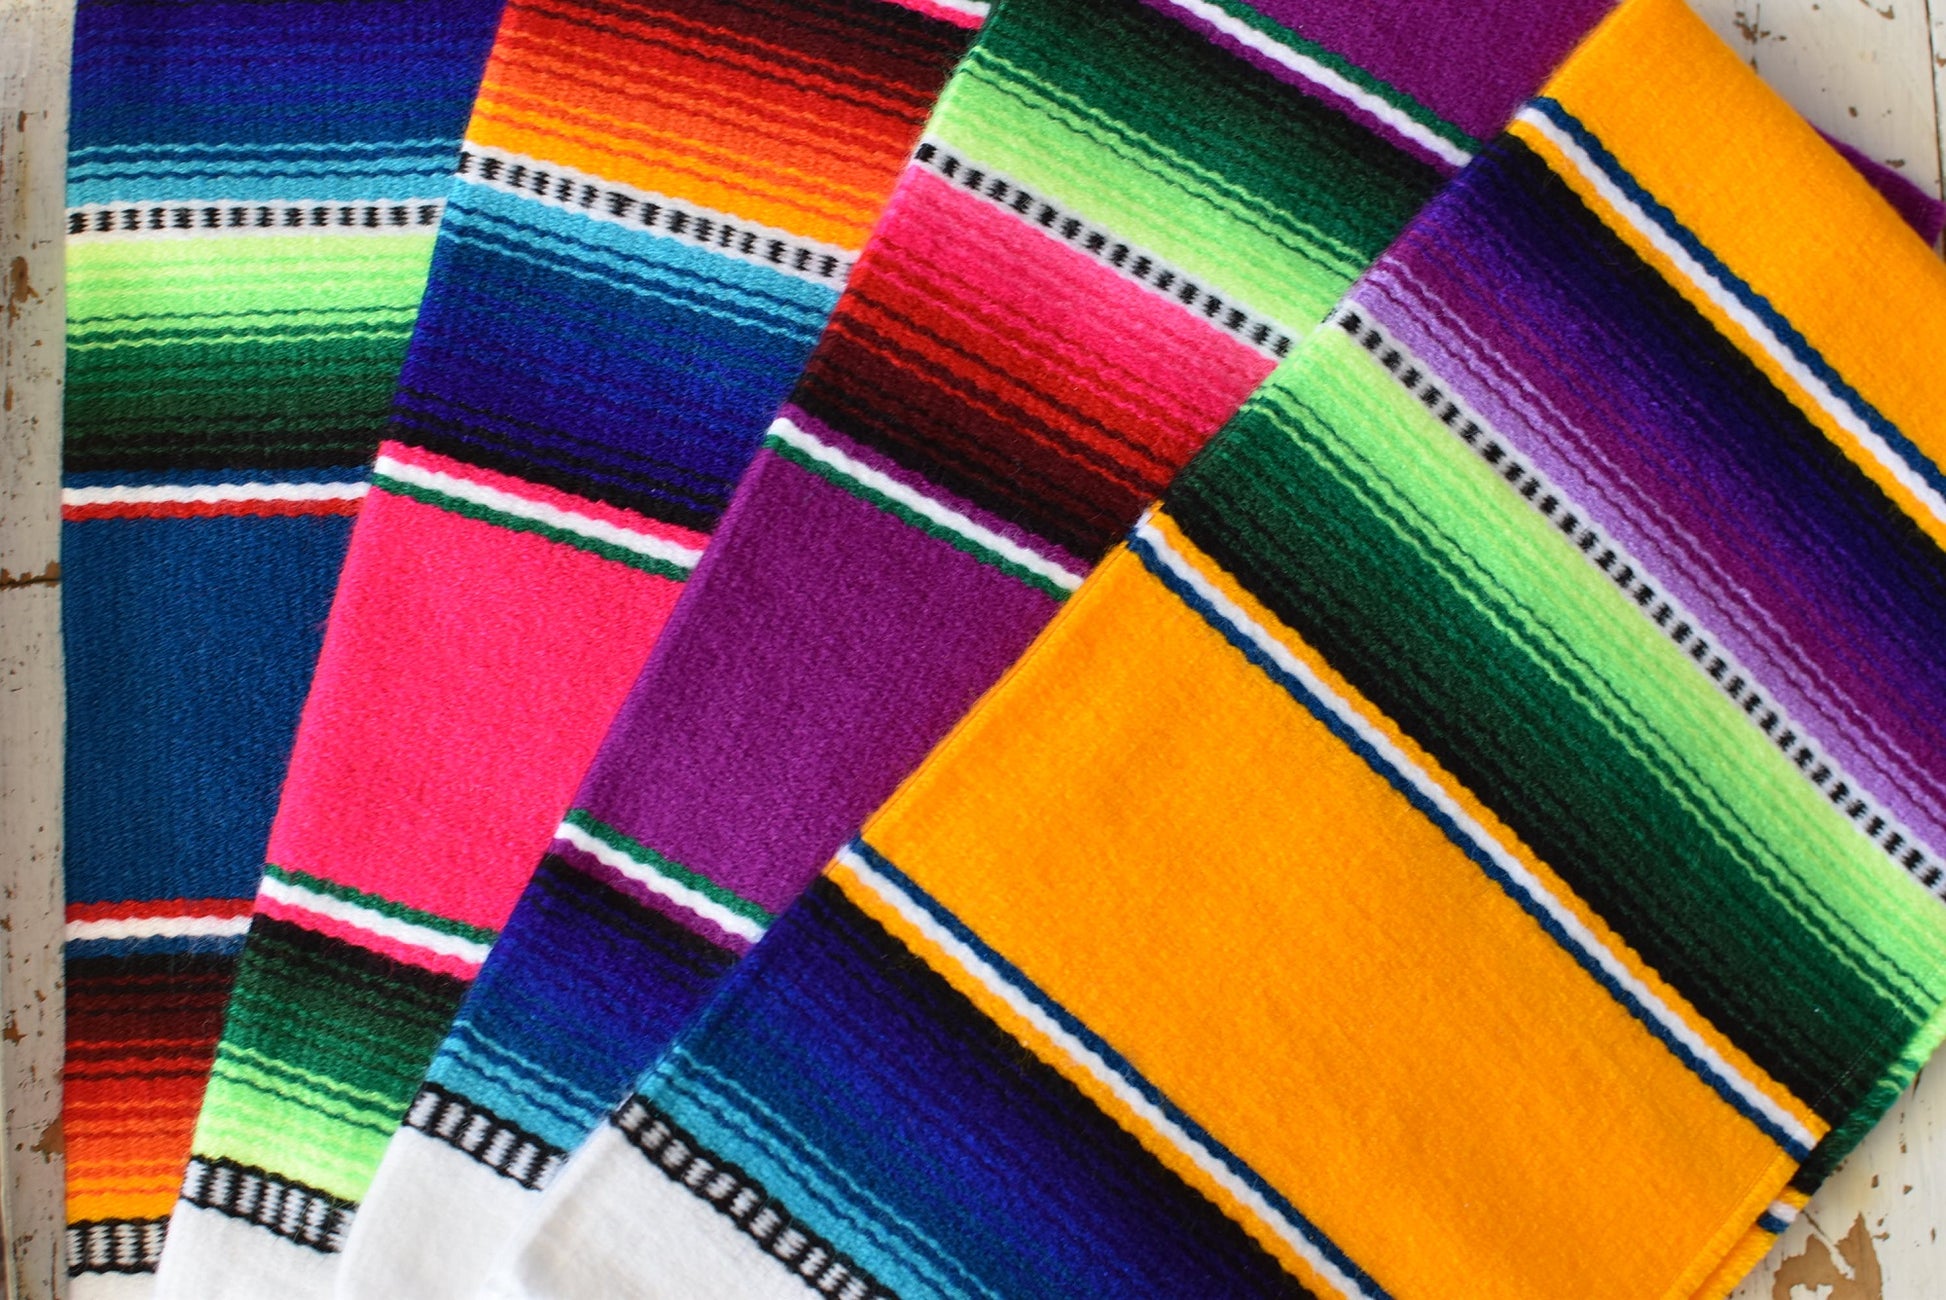 Mexican Placemats Set of 4 Serape Placemats Handwoven w Base Colours Yellow, Purple, Fuchsia, Dark Turquoise - ARTMEXICO